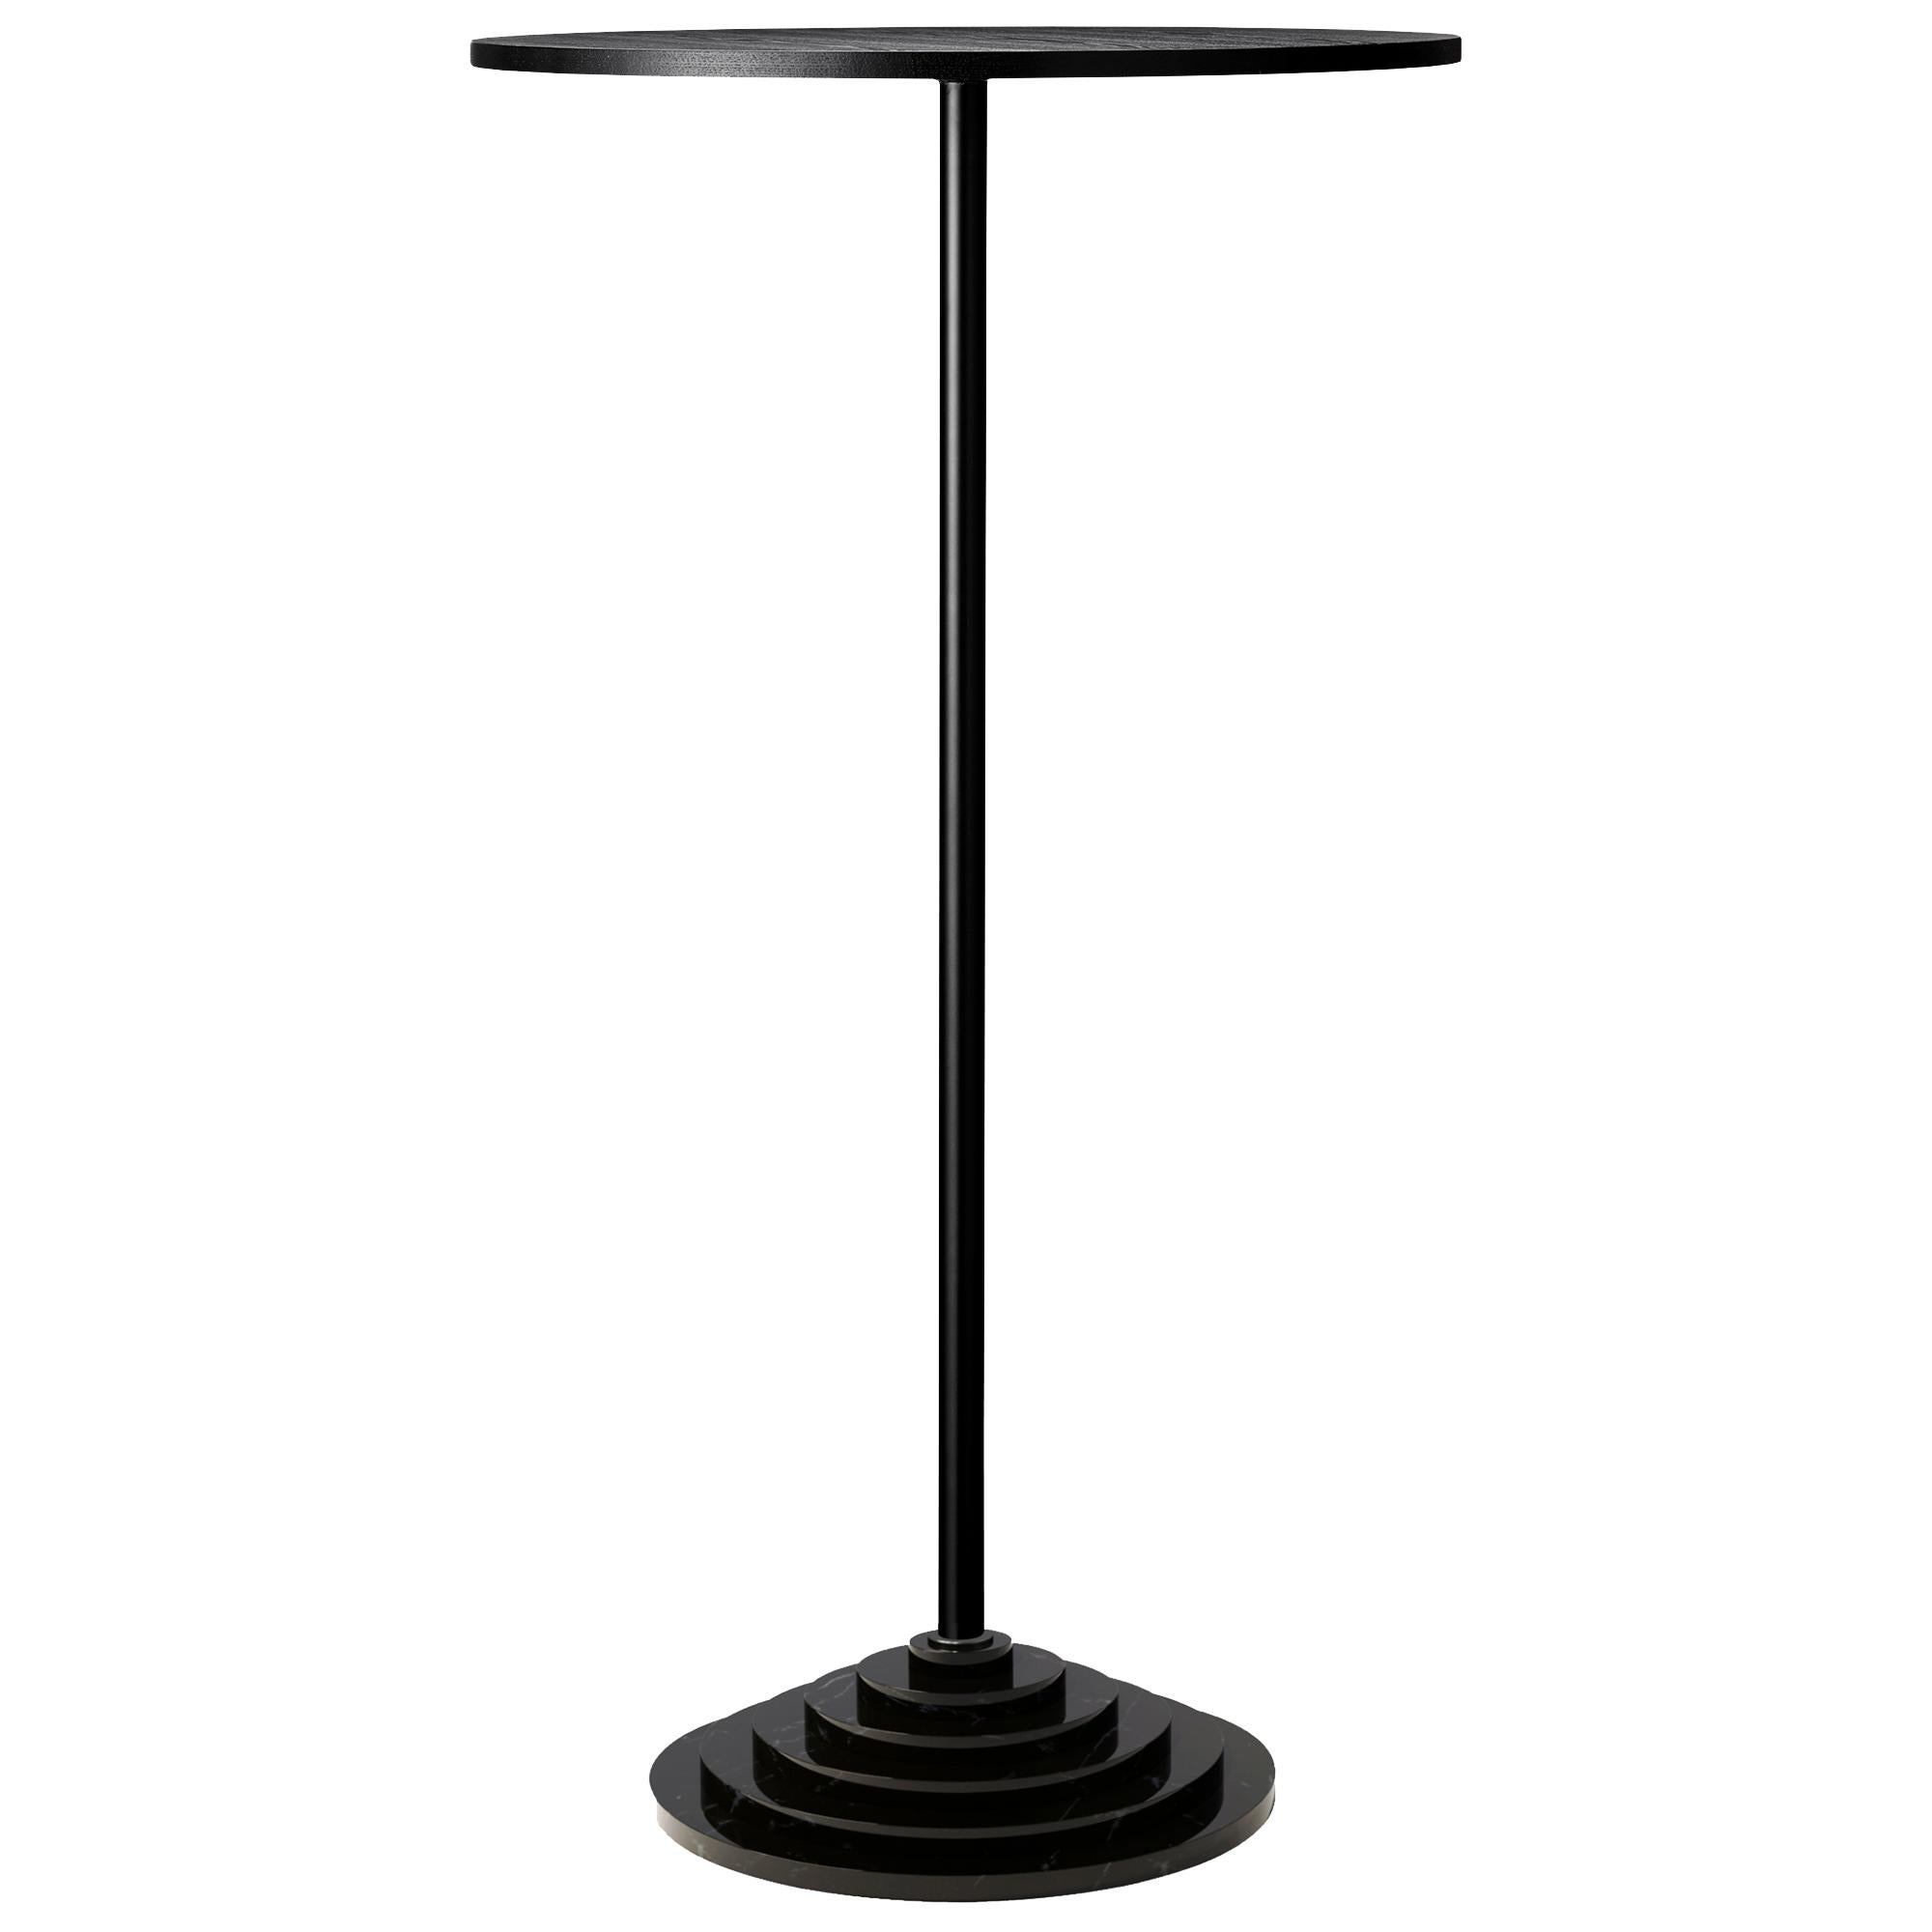 Black marble base and steel high table
Dimensions: Ø 60 x H 110 CM
Materials: Steel frame, marble base, veneer

Elegant table with a heavy marble base which creates an unique look.